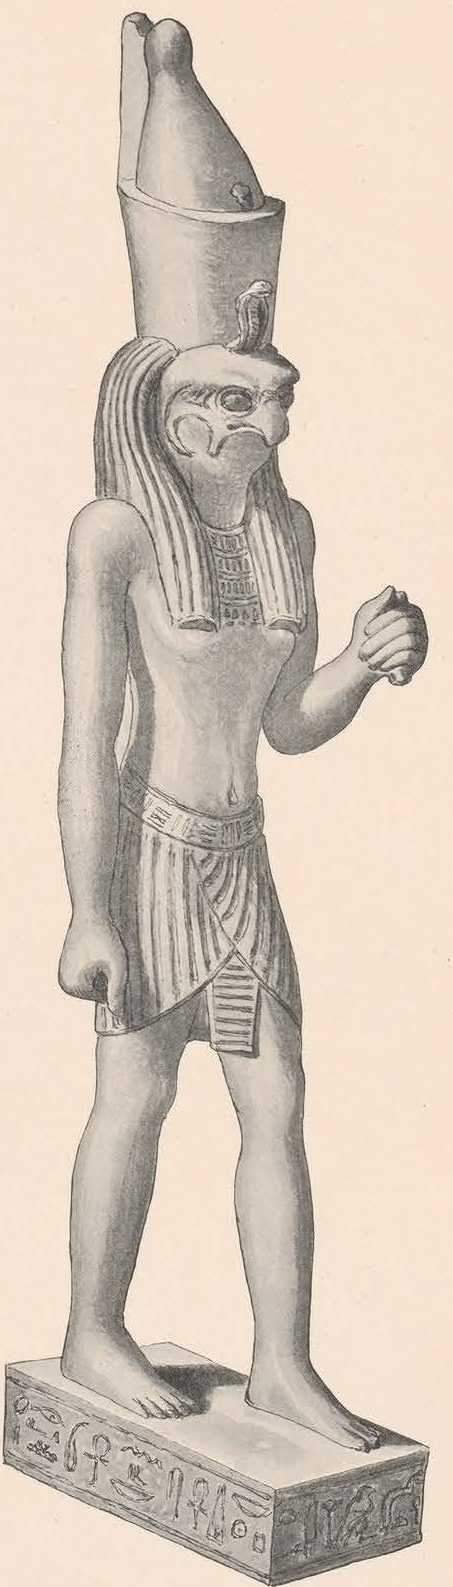 Image for: Statue of Horus